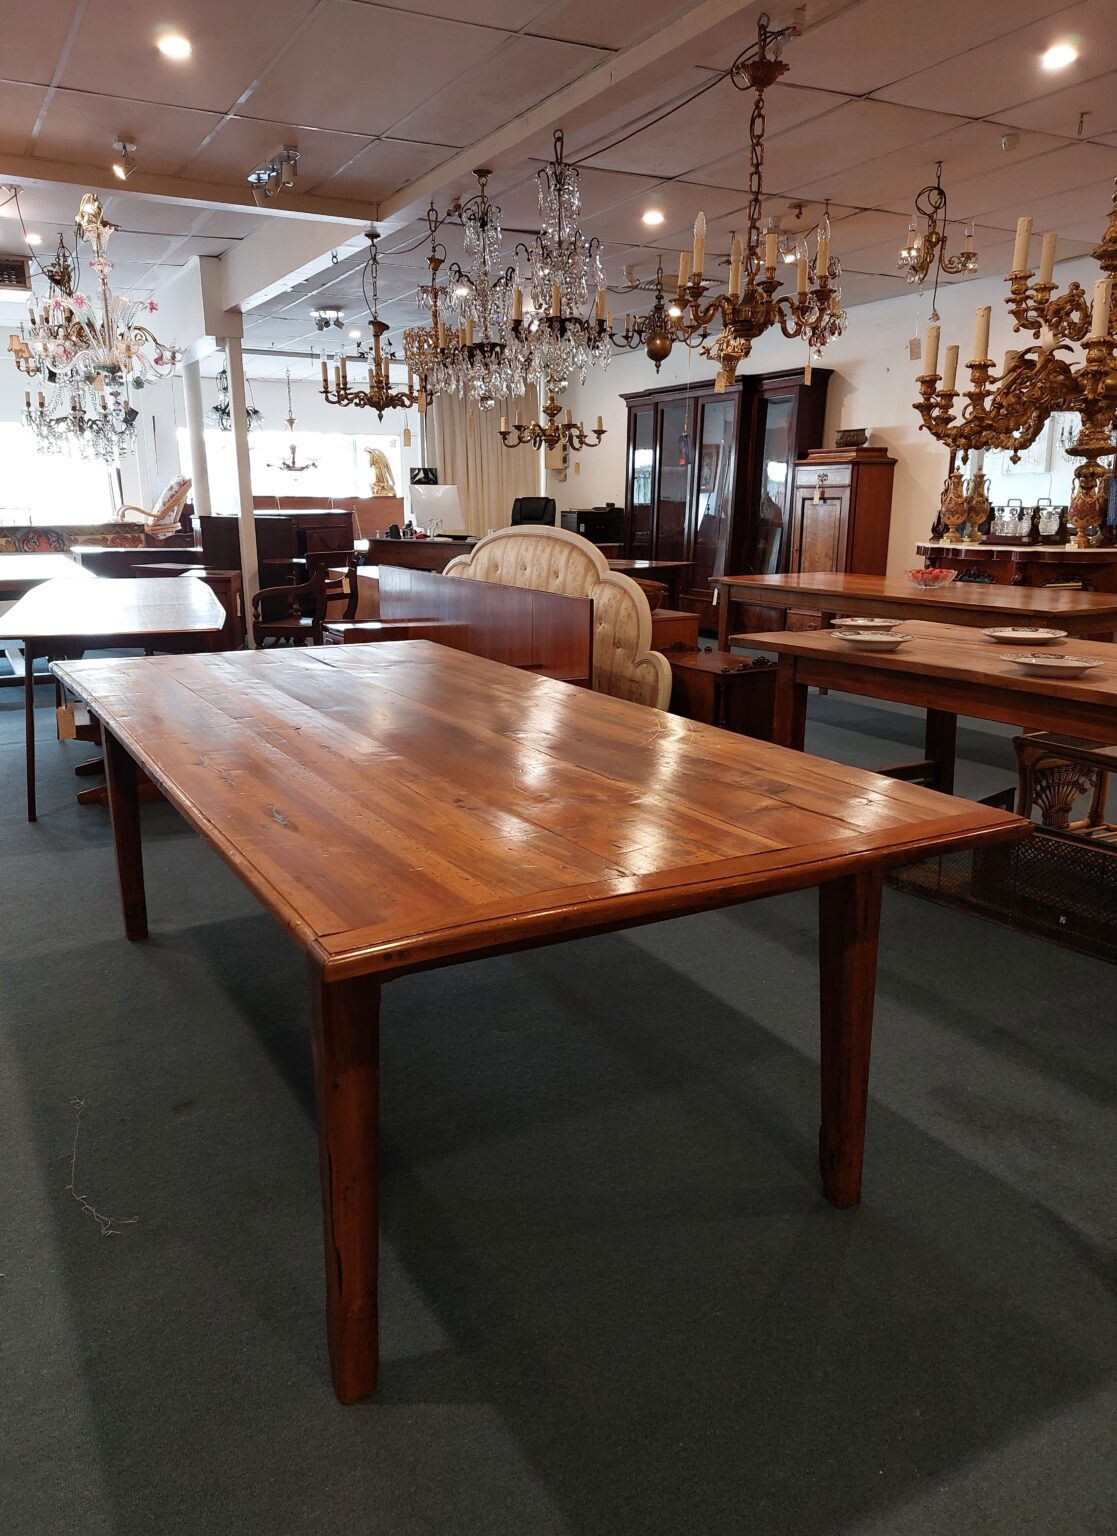 Lovely French Provincial Table in Walnut. Lovely Patina. 2.4 mtrs L x 1.1 mtrs W. Town and Country Antiques